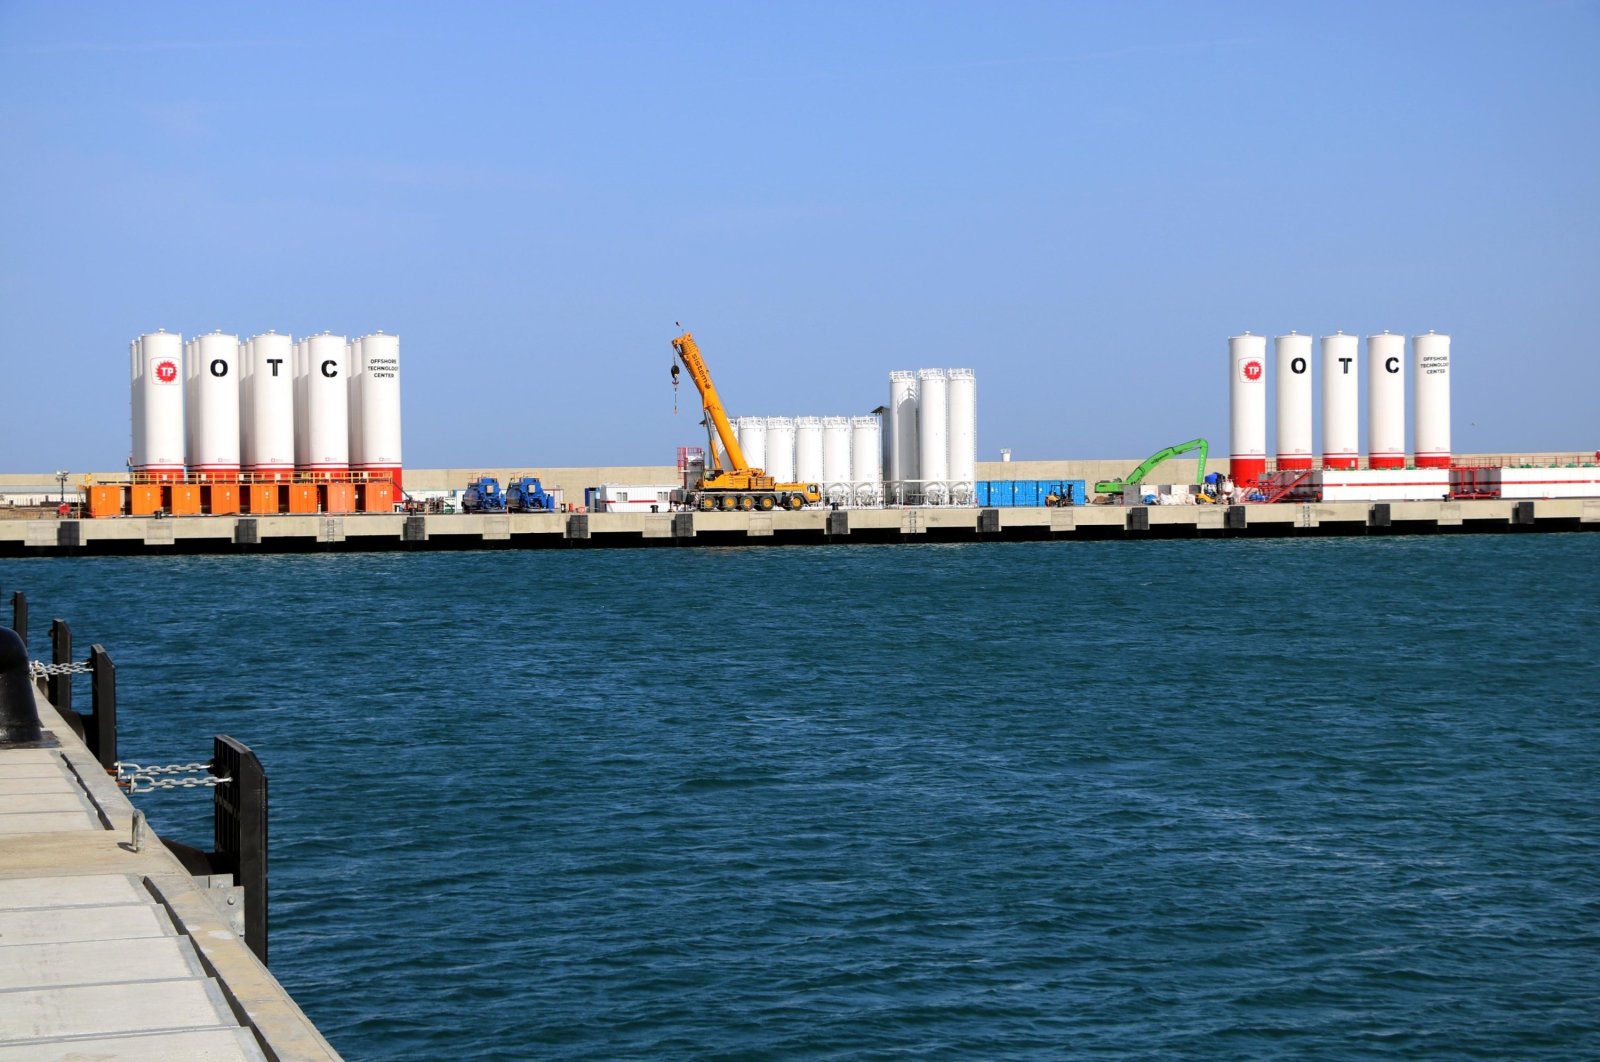 An industrial facility at the Filyos Port where the extracted gas is brought onshore, near Zonguldak, northern Türkiye, Jan. 25, 2021. (DHA Photo)